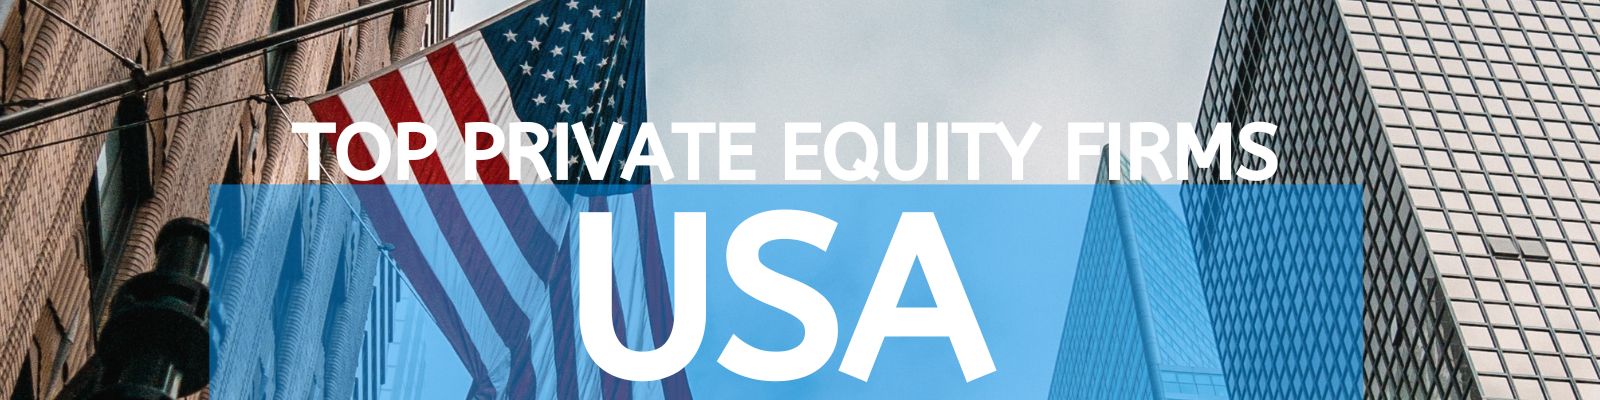 Top Private Equity Firms USA Private Equity Funds US DT